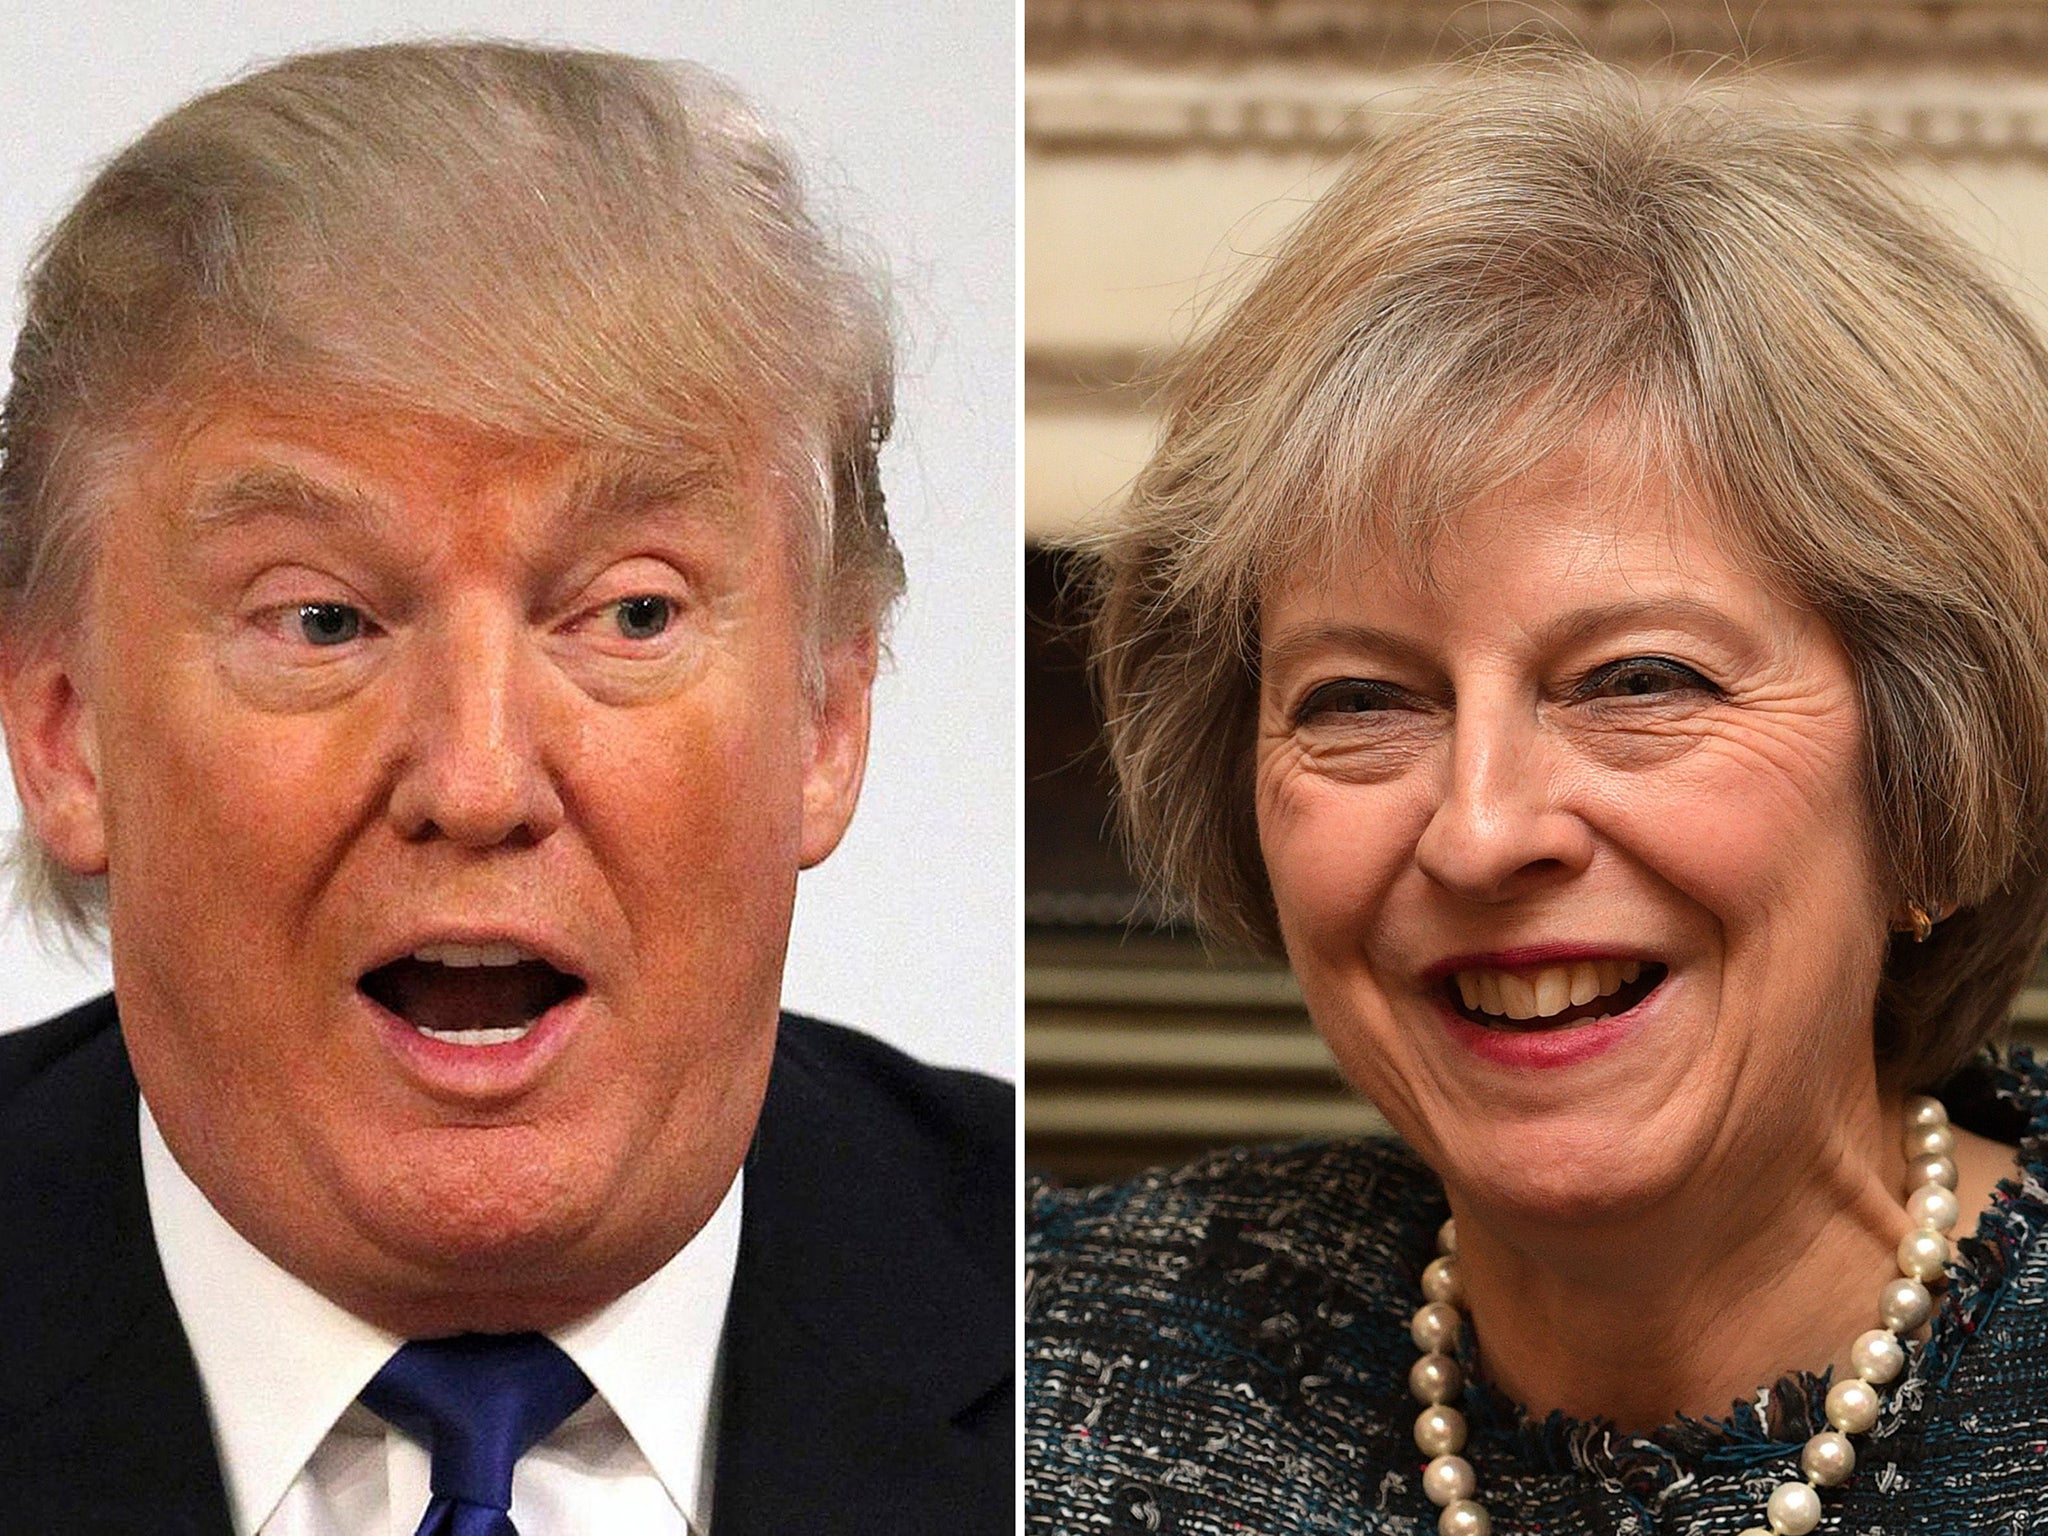 Theresa May is hoping to build a strong relationship with Donald Trump